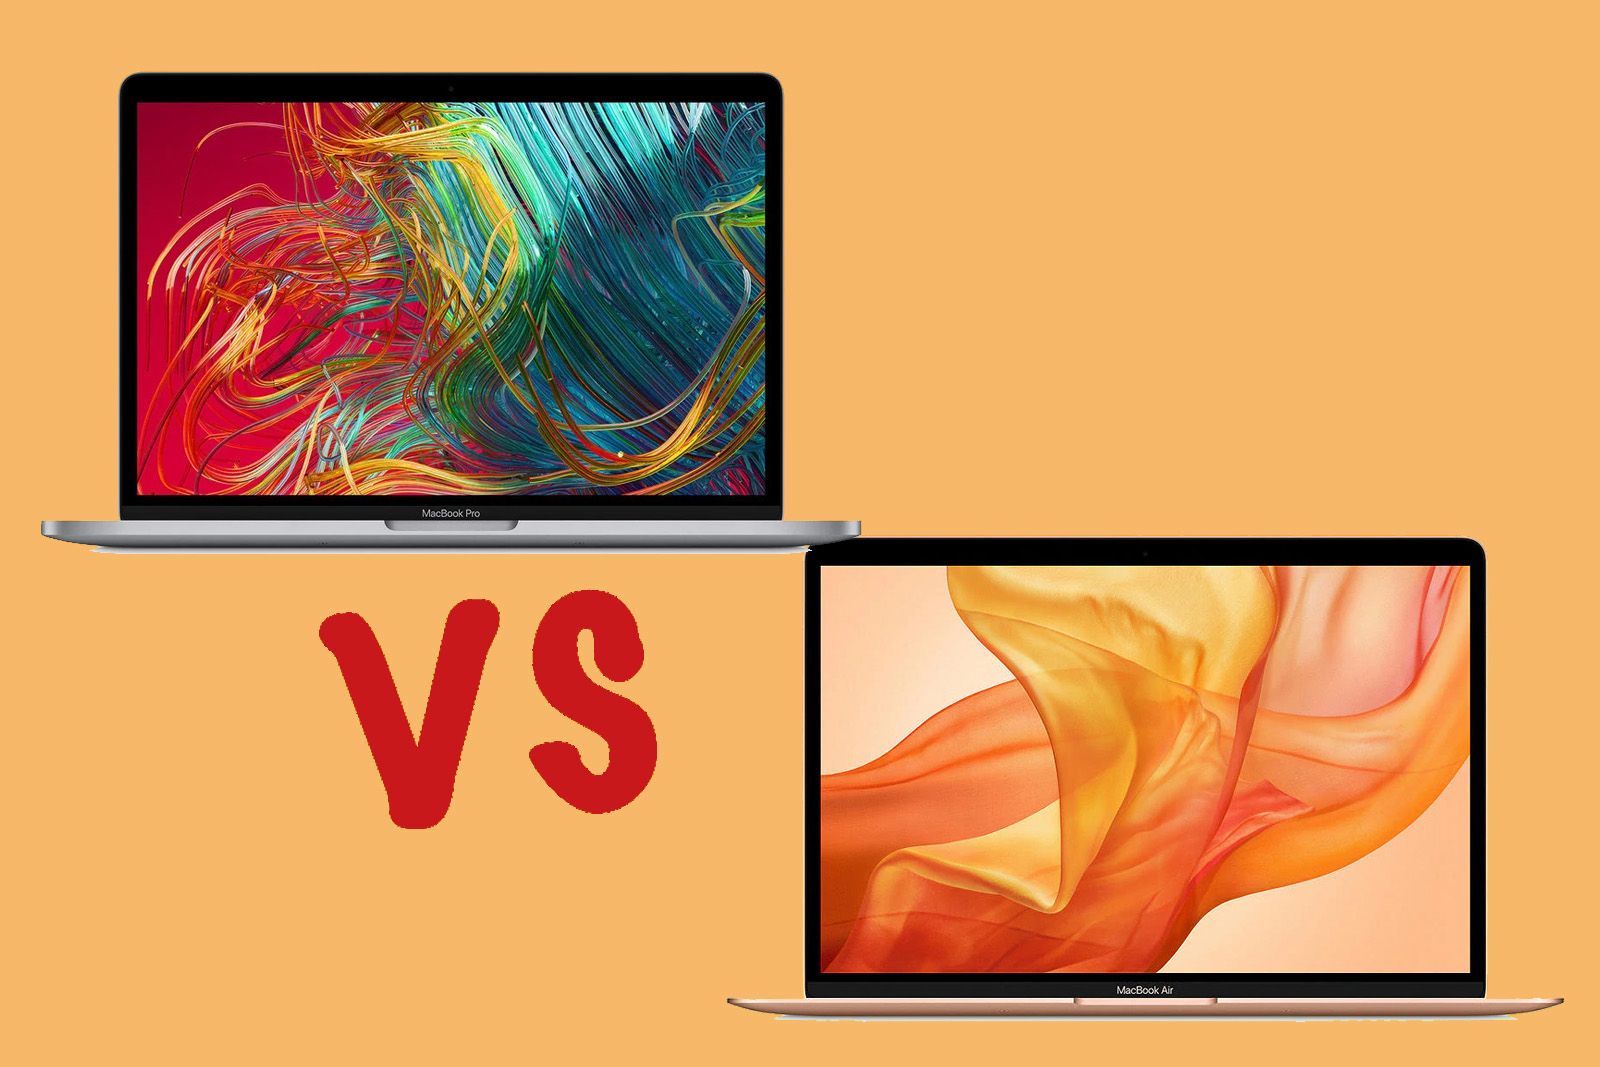 Intel MacBook Pro 13inch vs Intel MacBook Air What's the difference